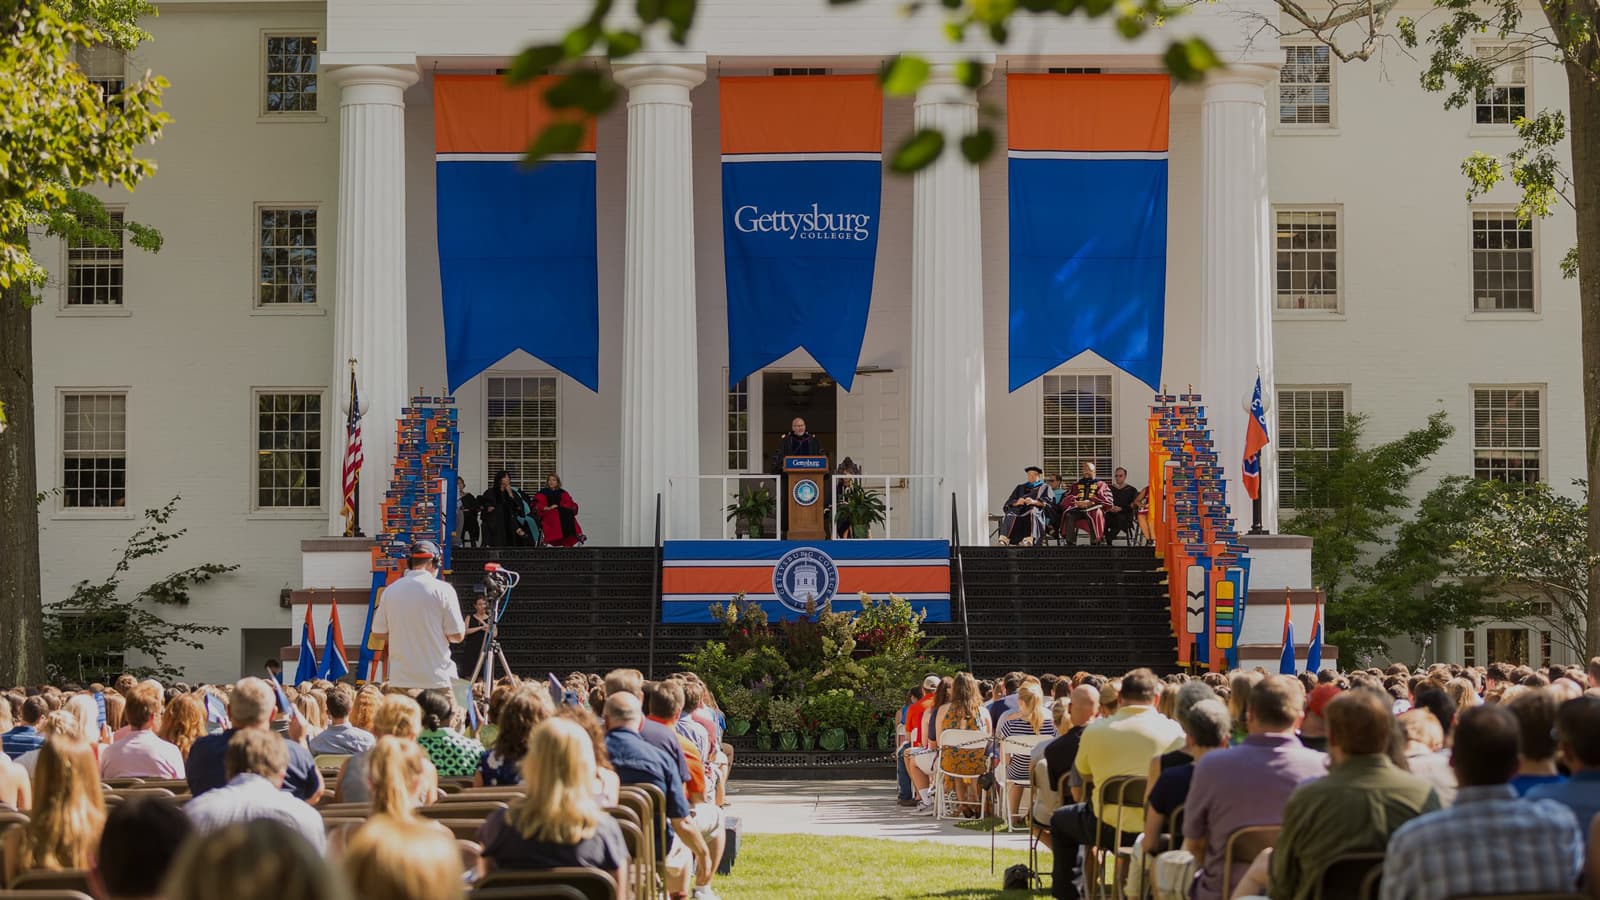 Gettysburg College banners flying from Penn Hall above Beacham Portico during ceremony with colorful audience